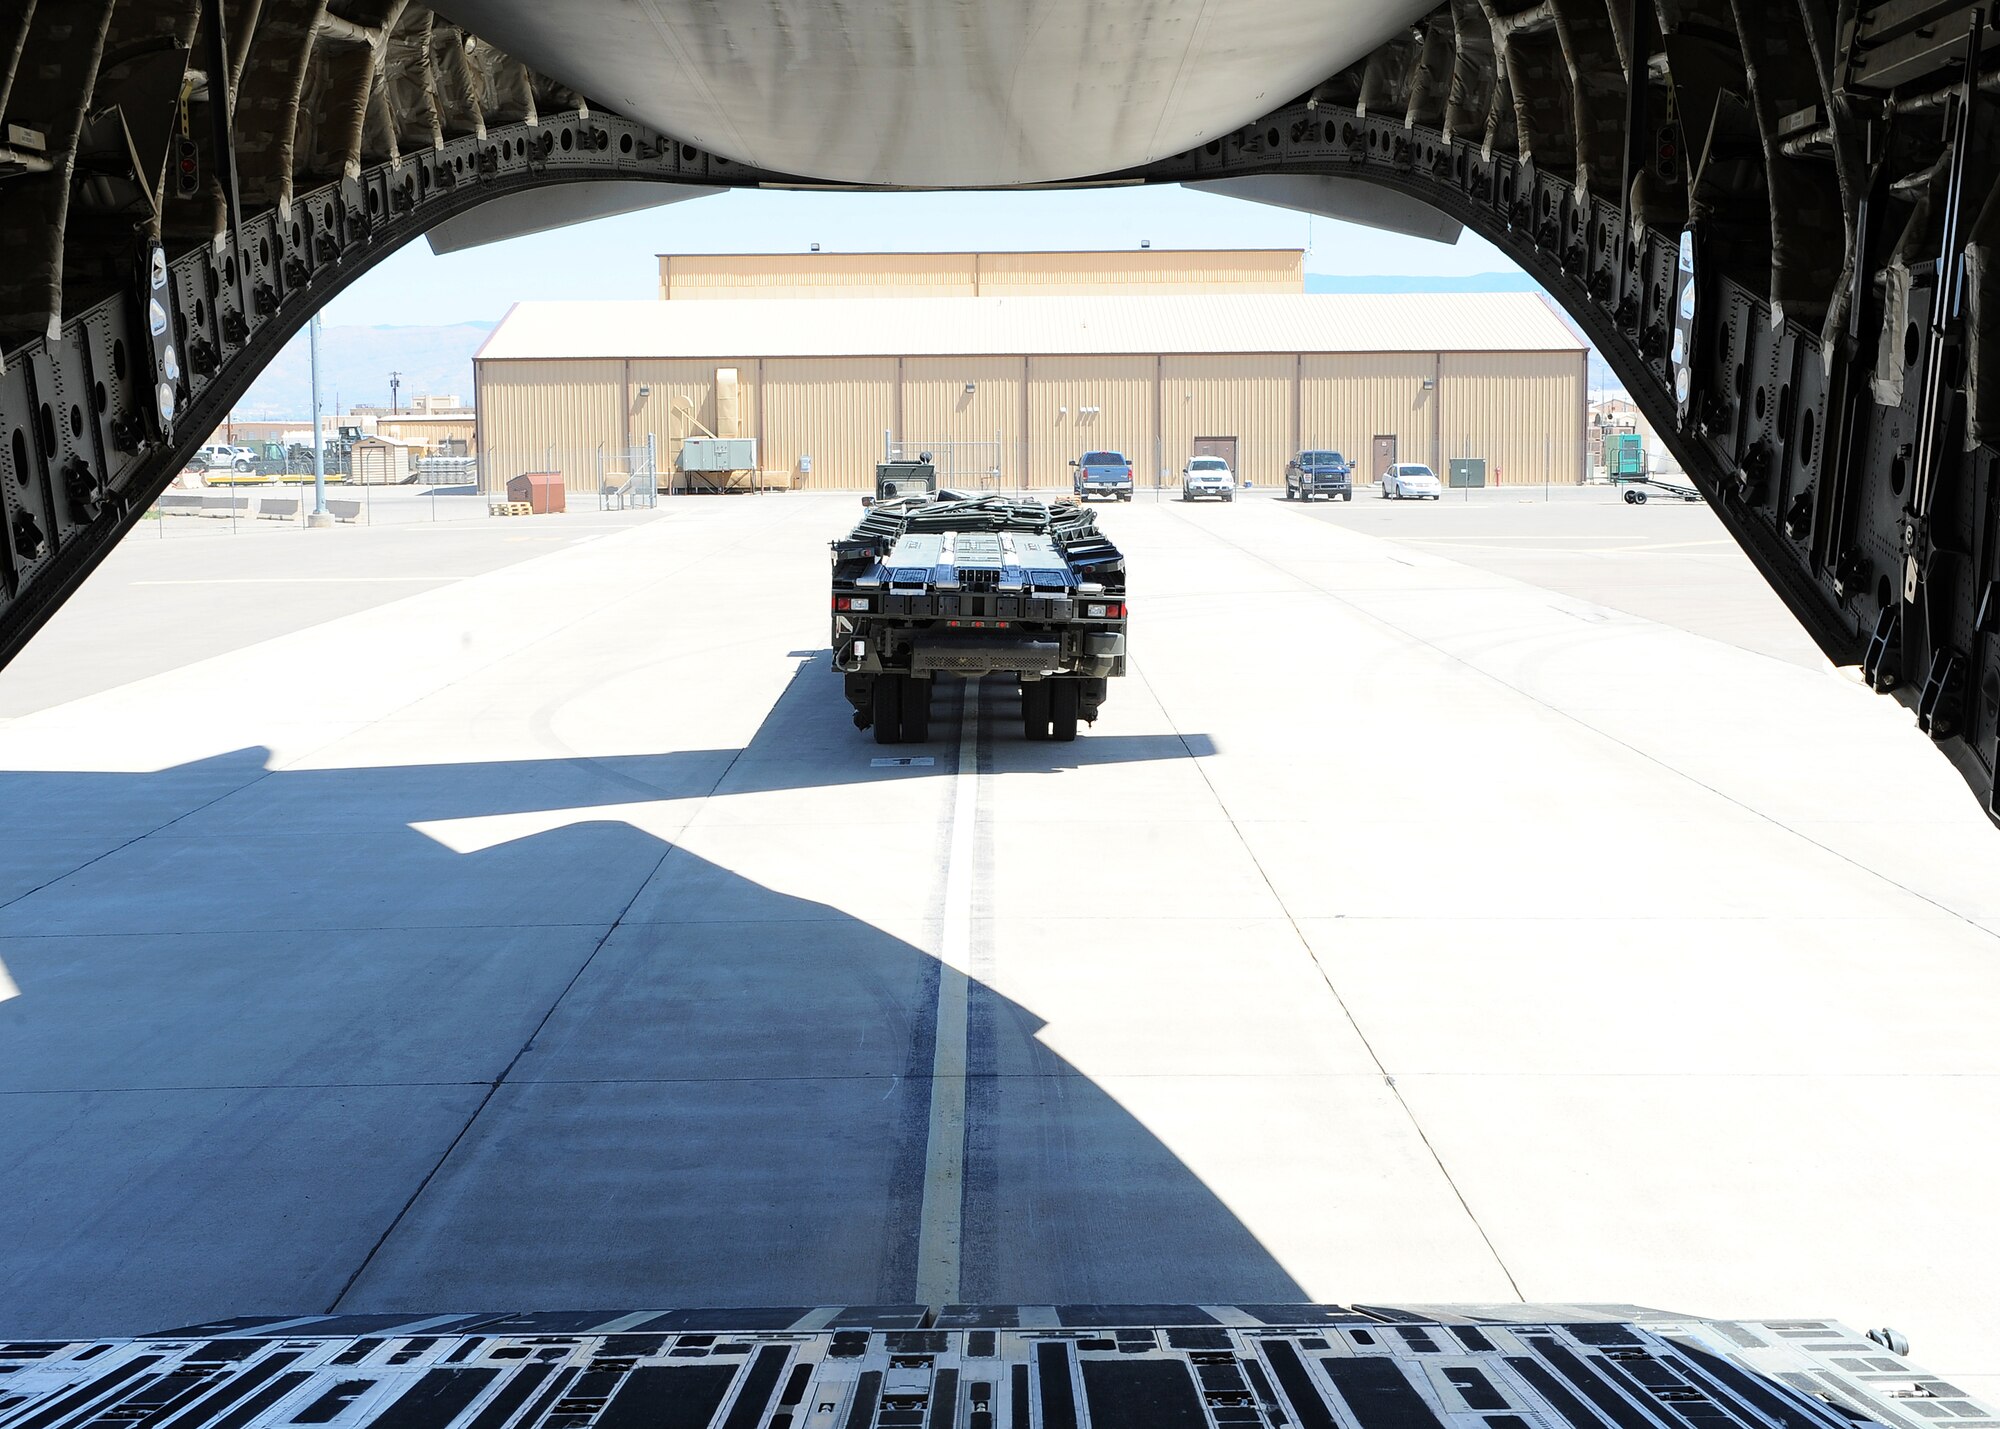 Members of the 49th Logistics Readiness Squadron load a 60,000 pond aircraft loader onto a C-17 from McChord Air Force Base, Wash., here on Holloman Air Force Base, N.M., March 3. The aircraft loader is being deployed to CENTAF to assist with cargo operations in the AOR. (U.S. Air Force photo/ Airman 1st Class DeAndre Curtiss)